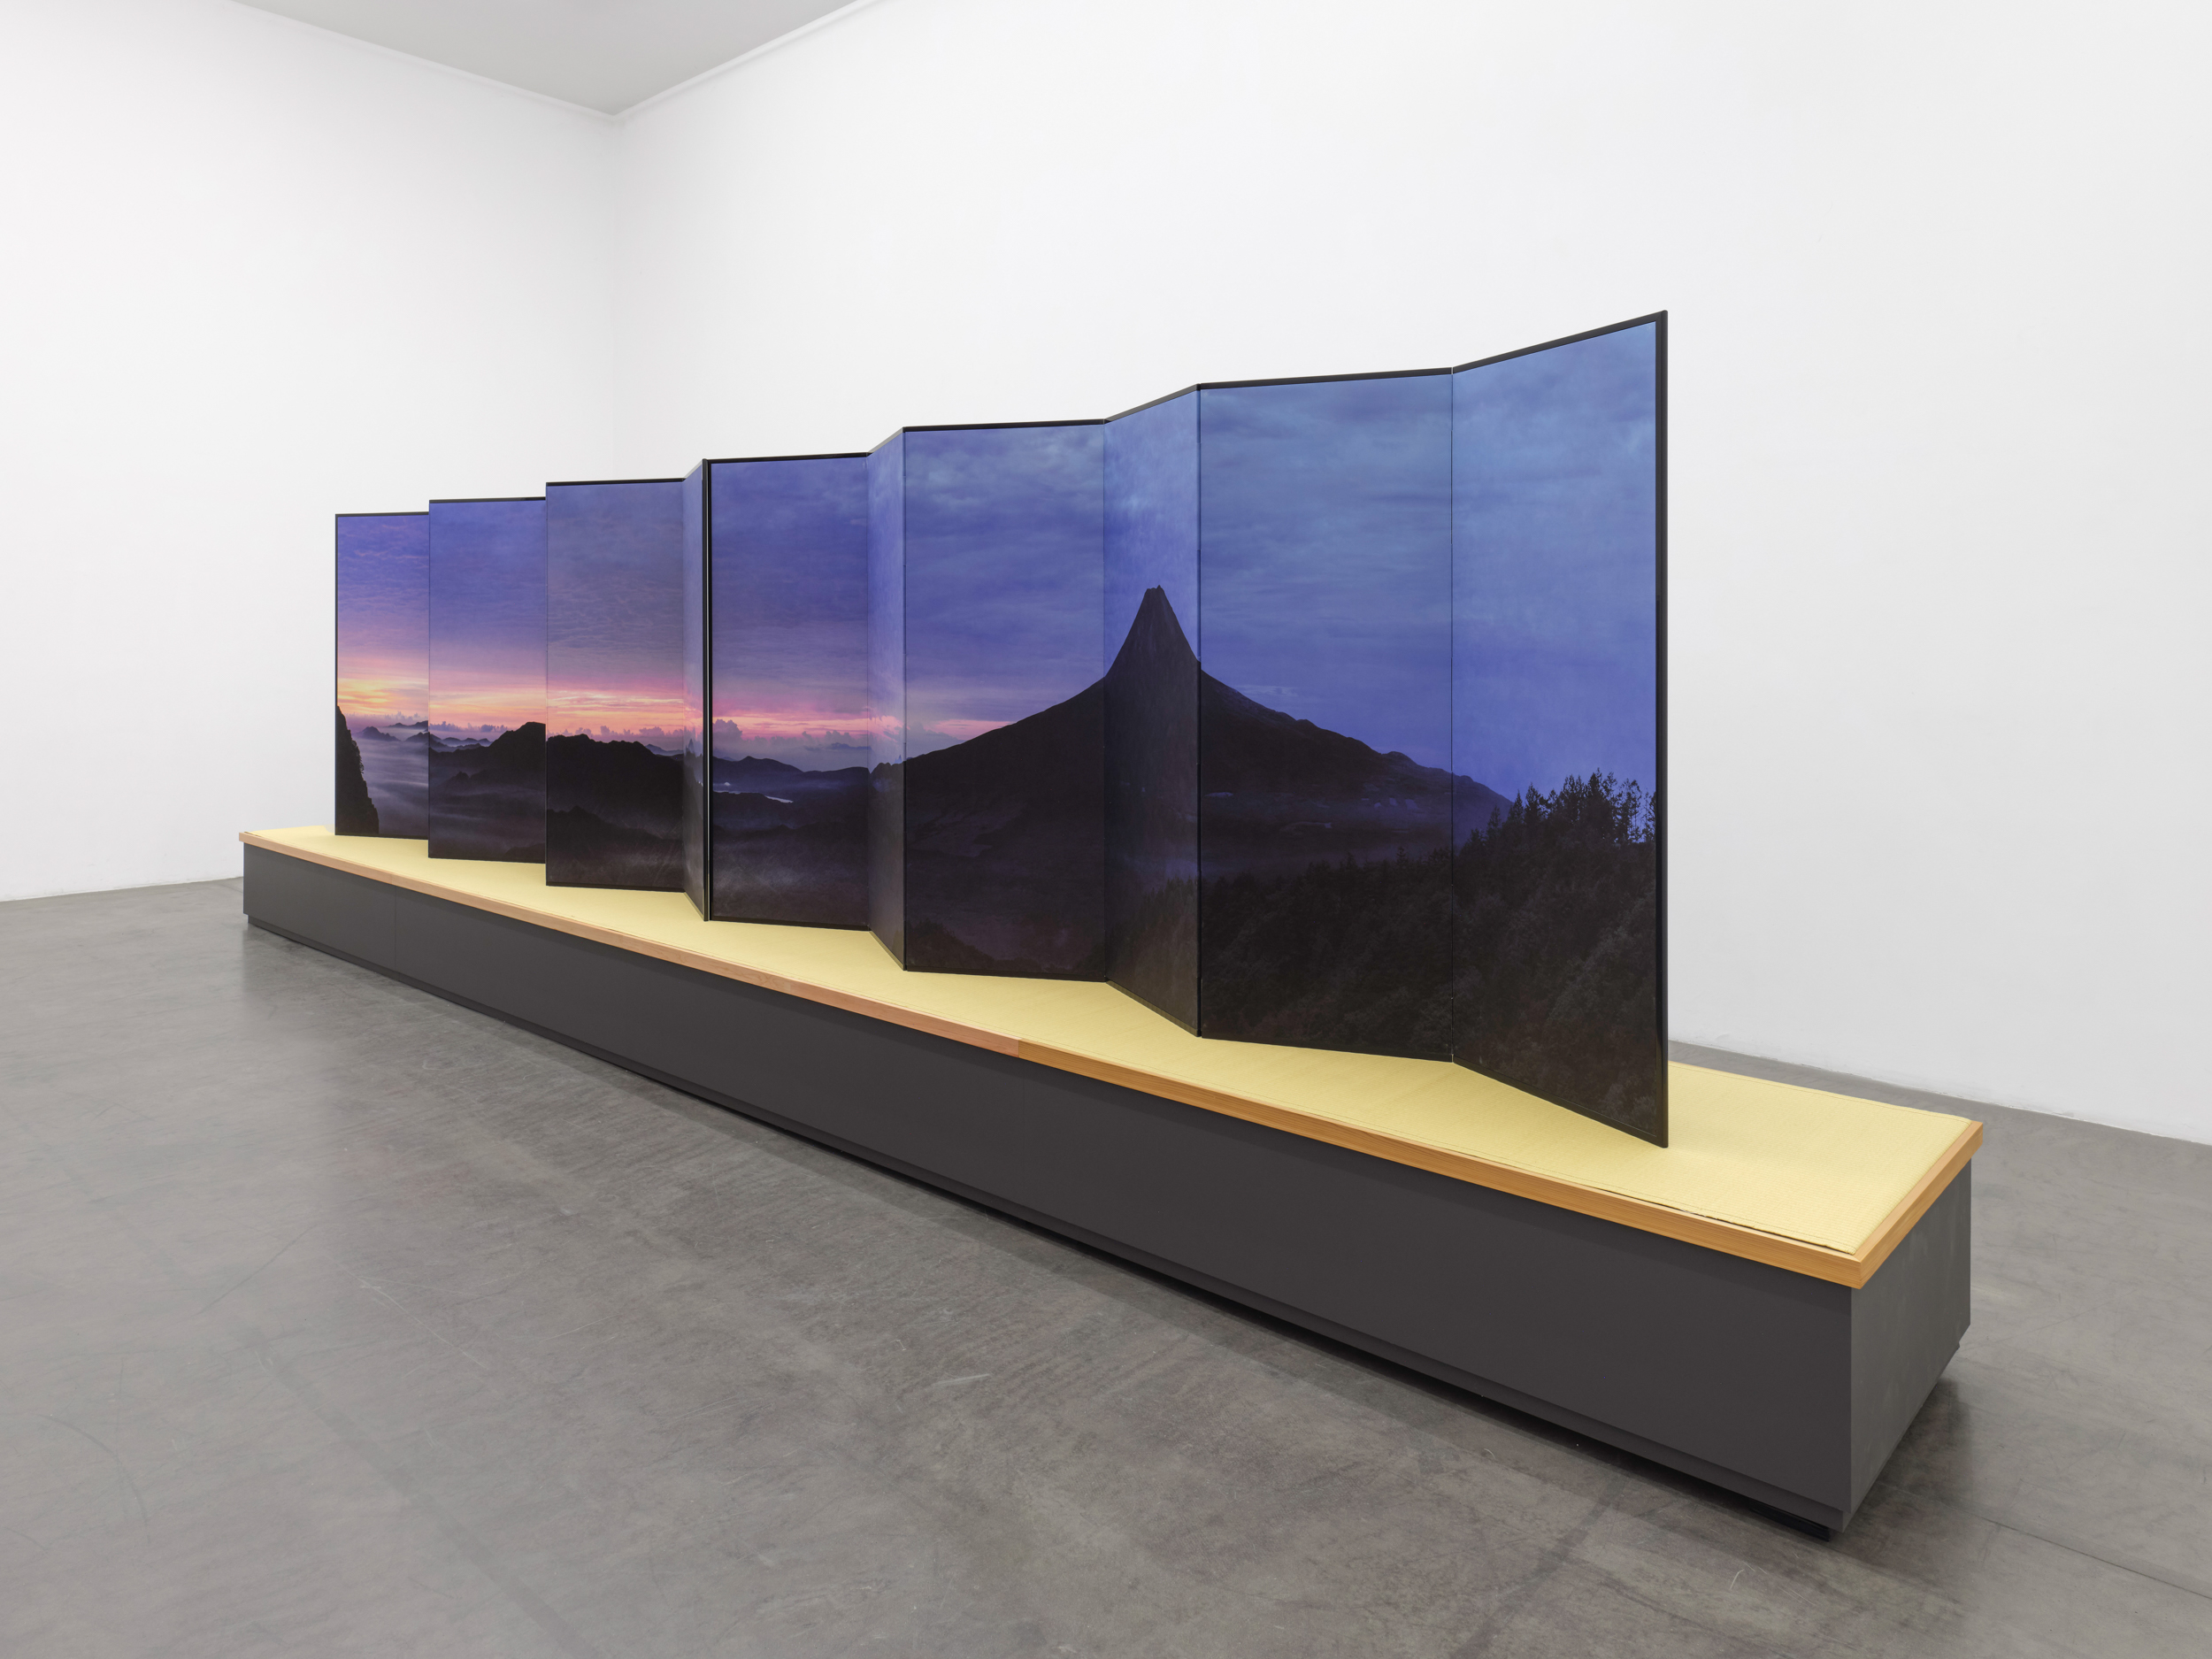 Installation view of a long folding screen depicting Mt. Fuji; the screen sits on a large pedestal